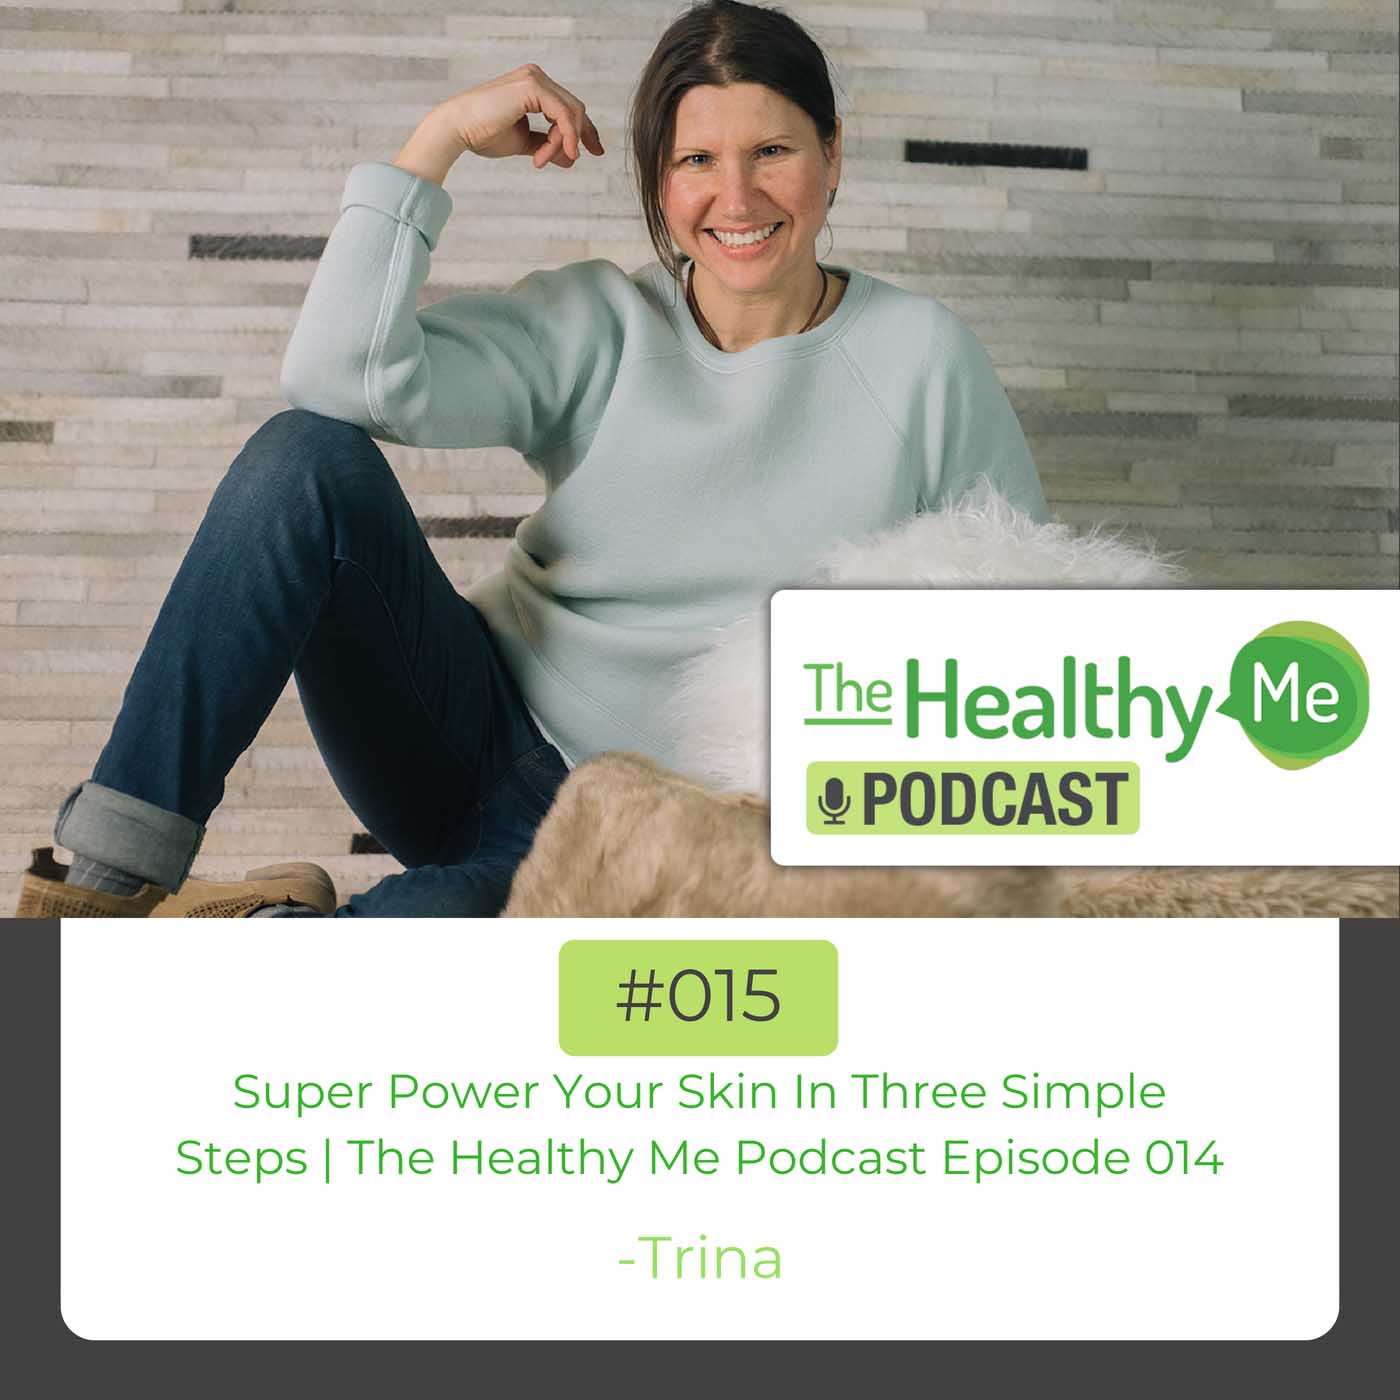 Super Power Your Skin In Three Simple Steps | The Healthy Me Podcast Episode 015